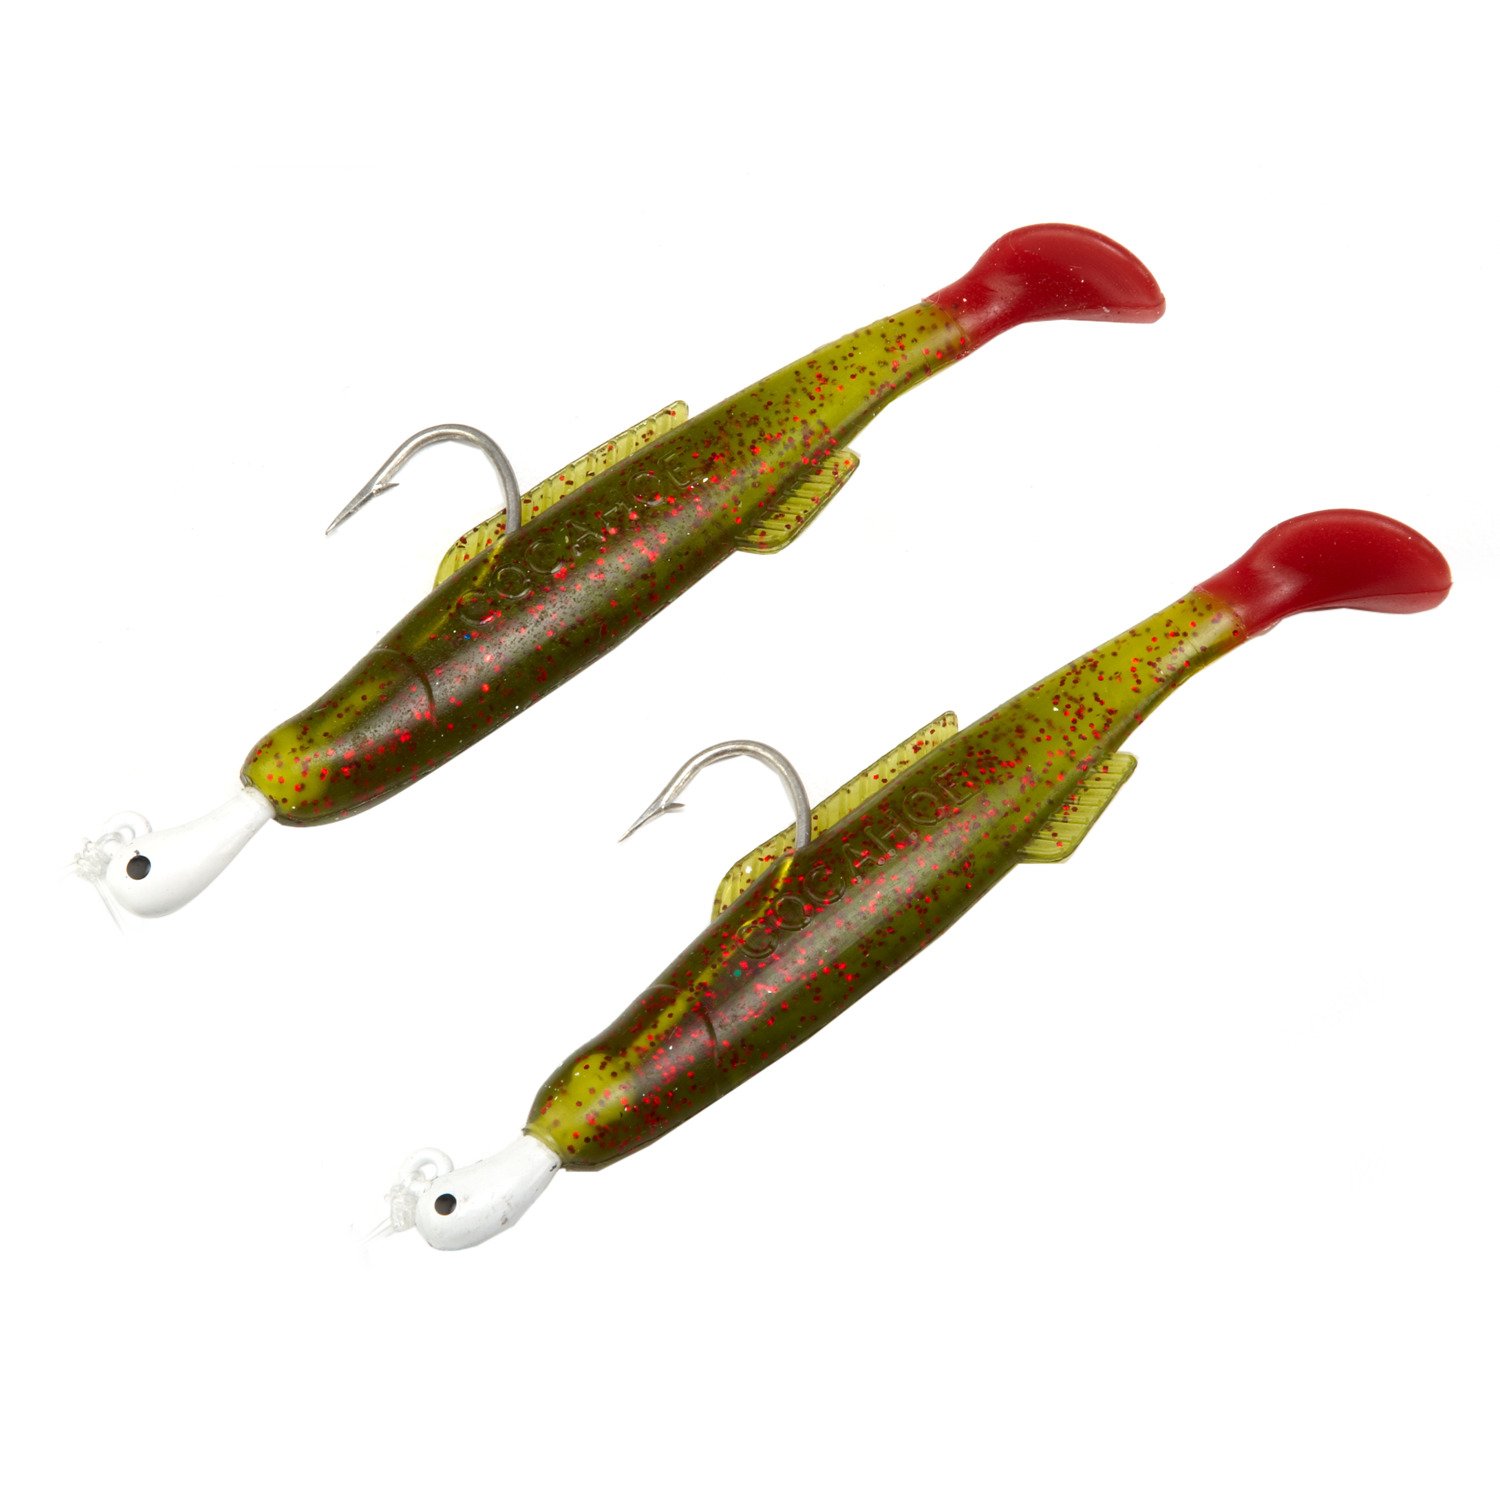  H&H Glass Minnow Double Rigs for Speckled Trout and